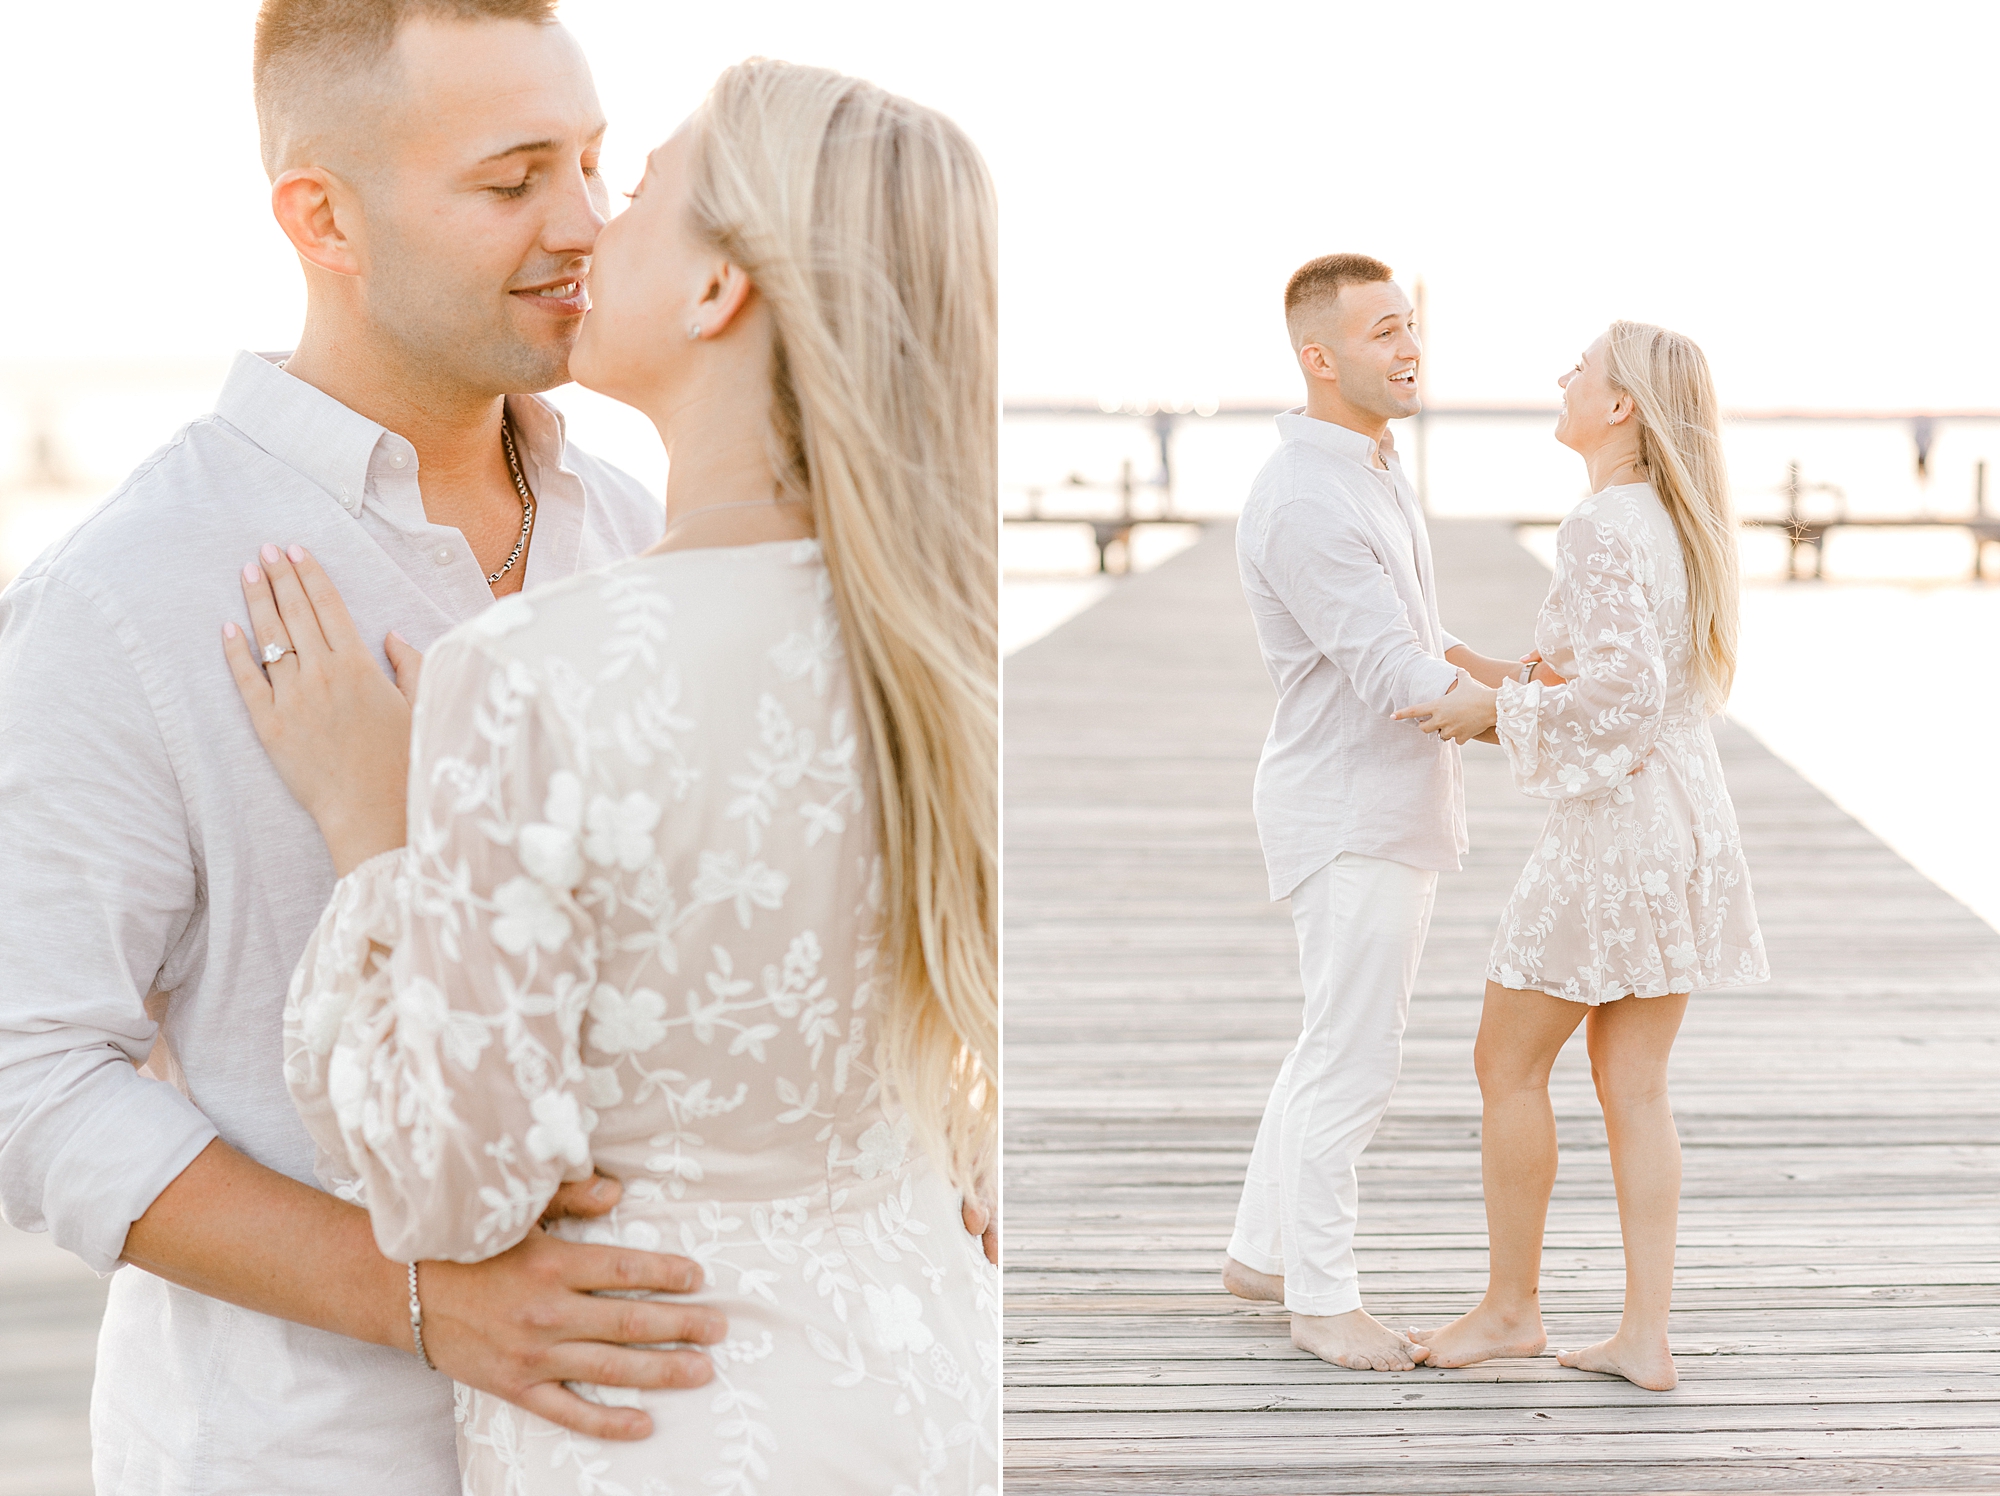 blonde woman in lace dress leans up to kiss man during engagement session in Lavallette, NJ